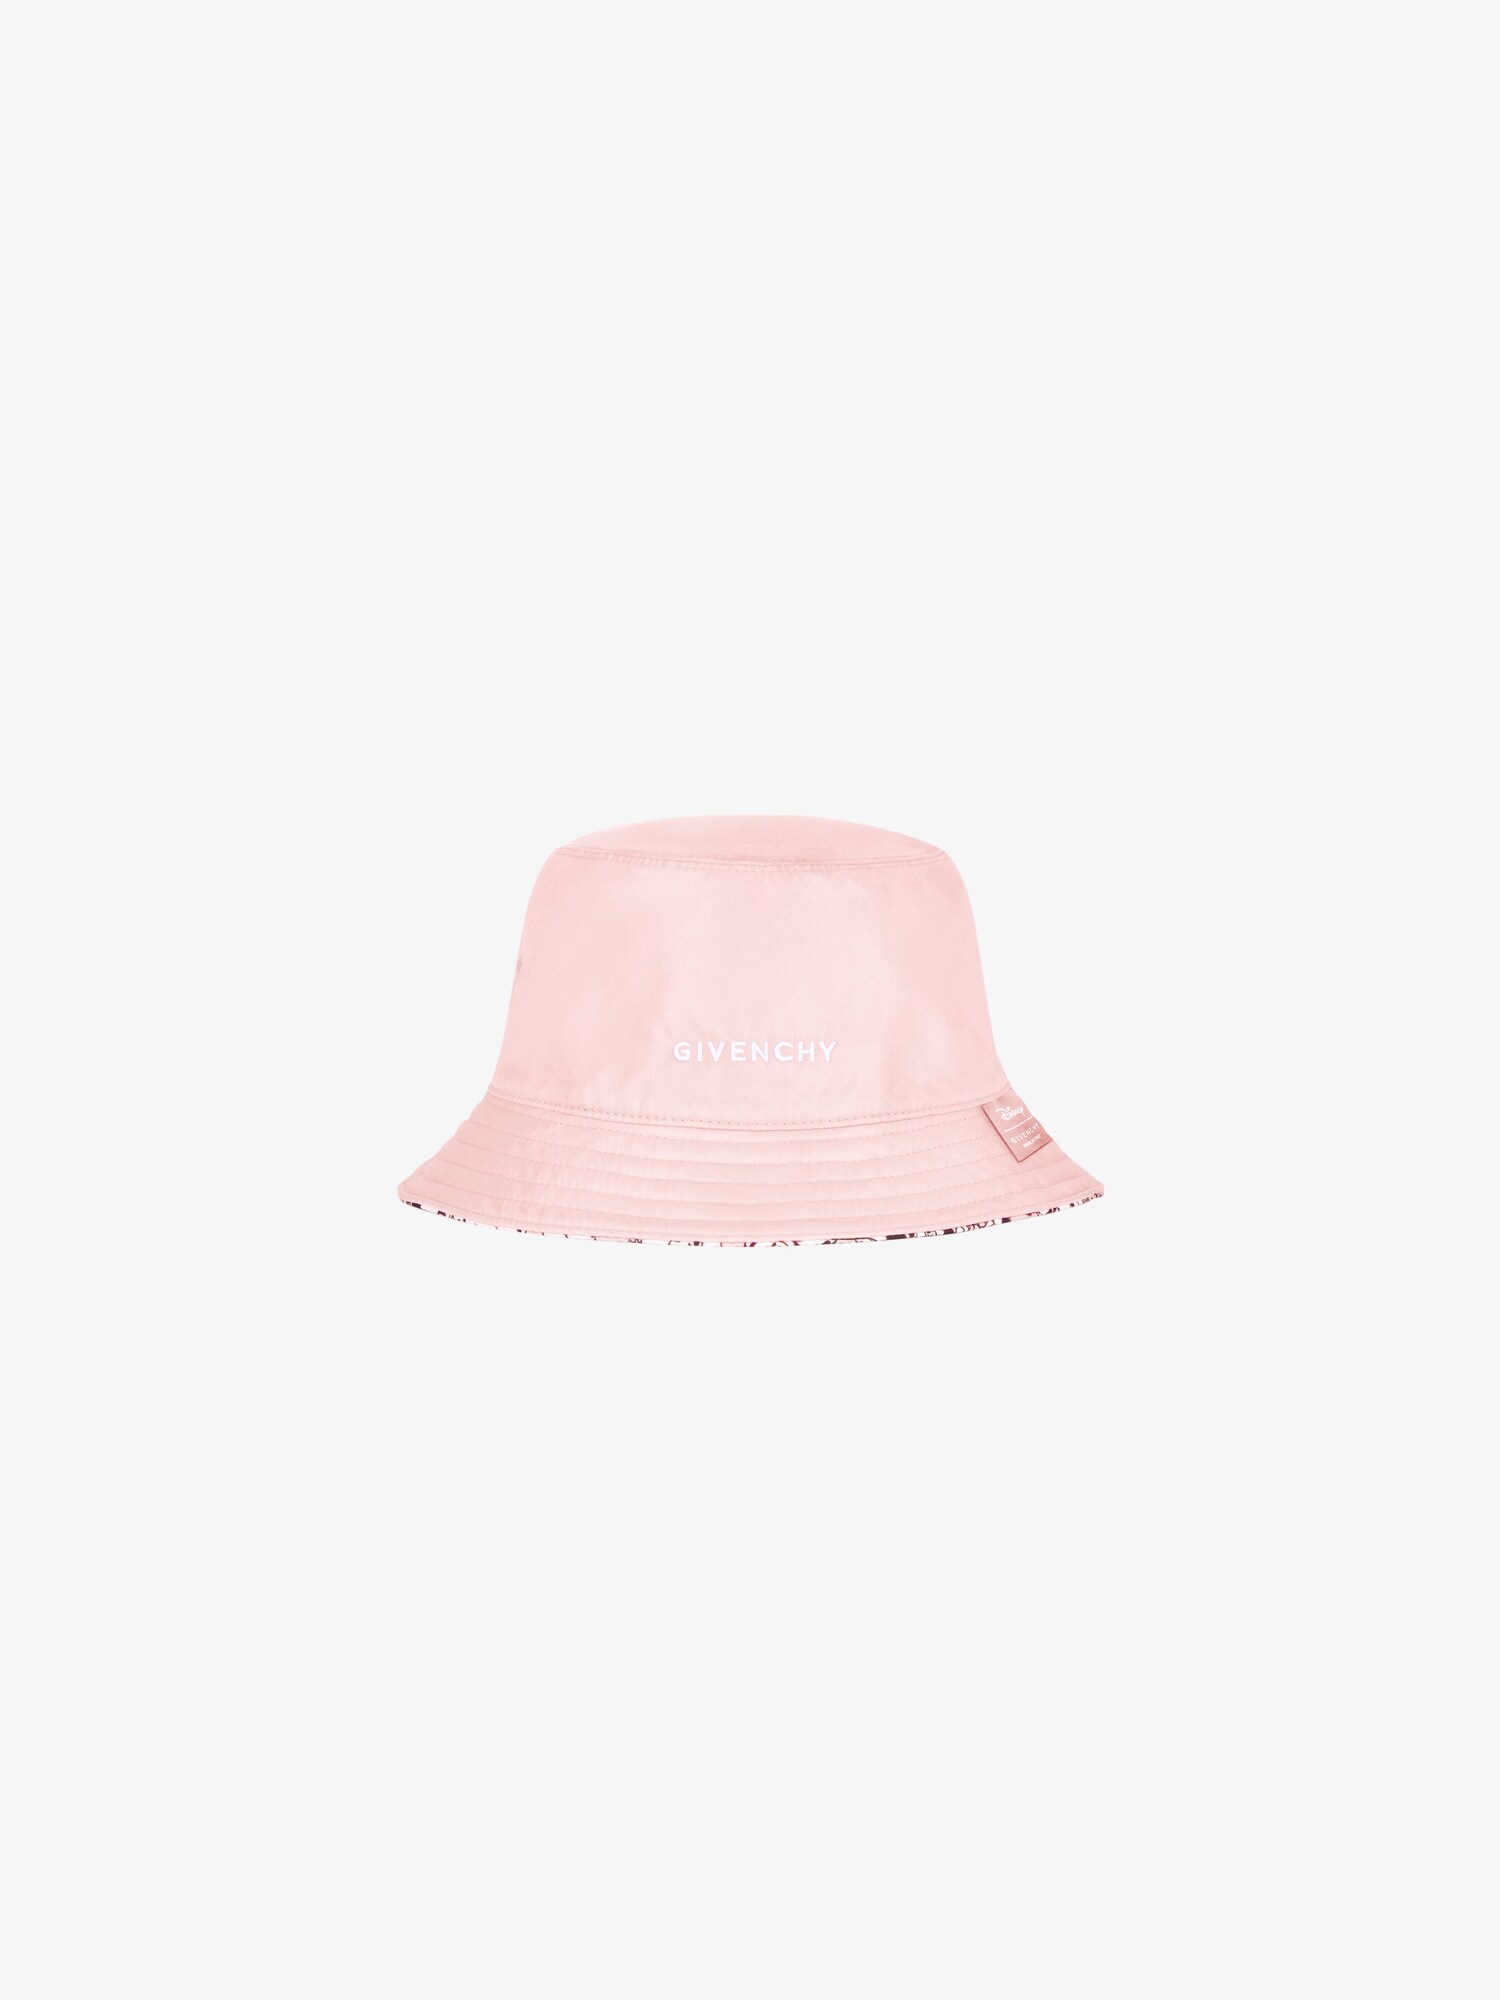 GIVENCHY 101 Dalmatians reversible bucket hat in printed nylon